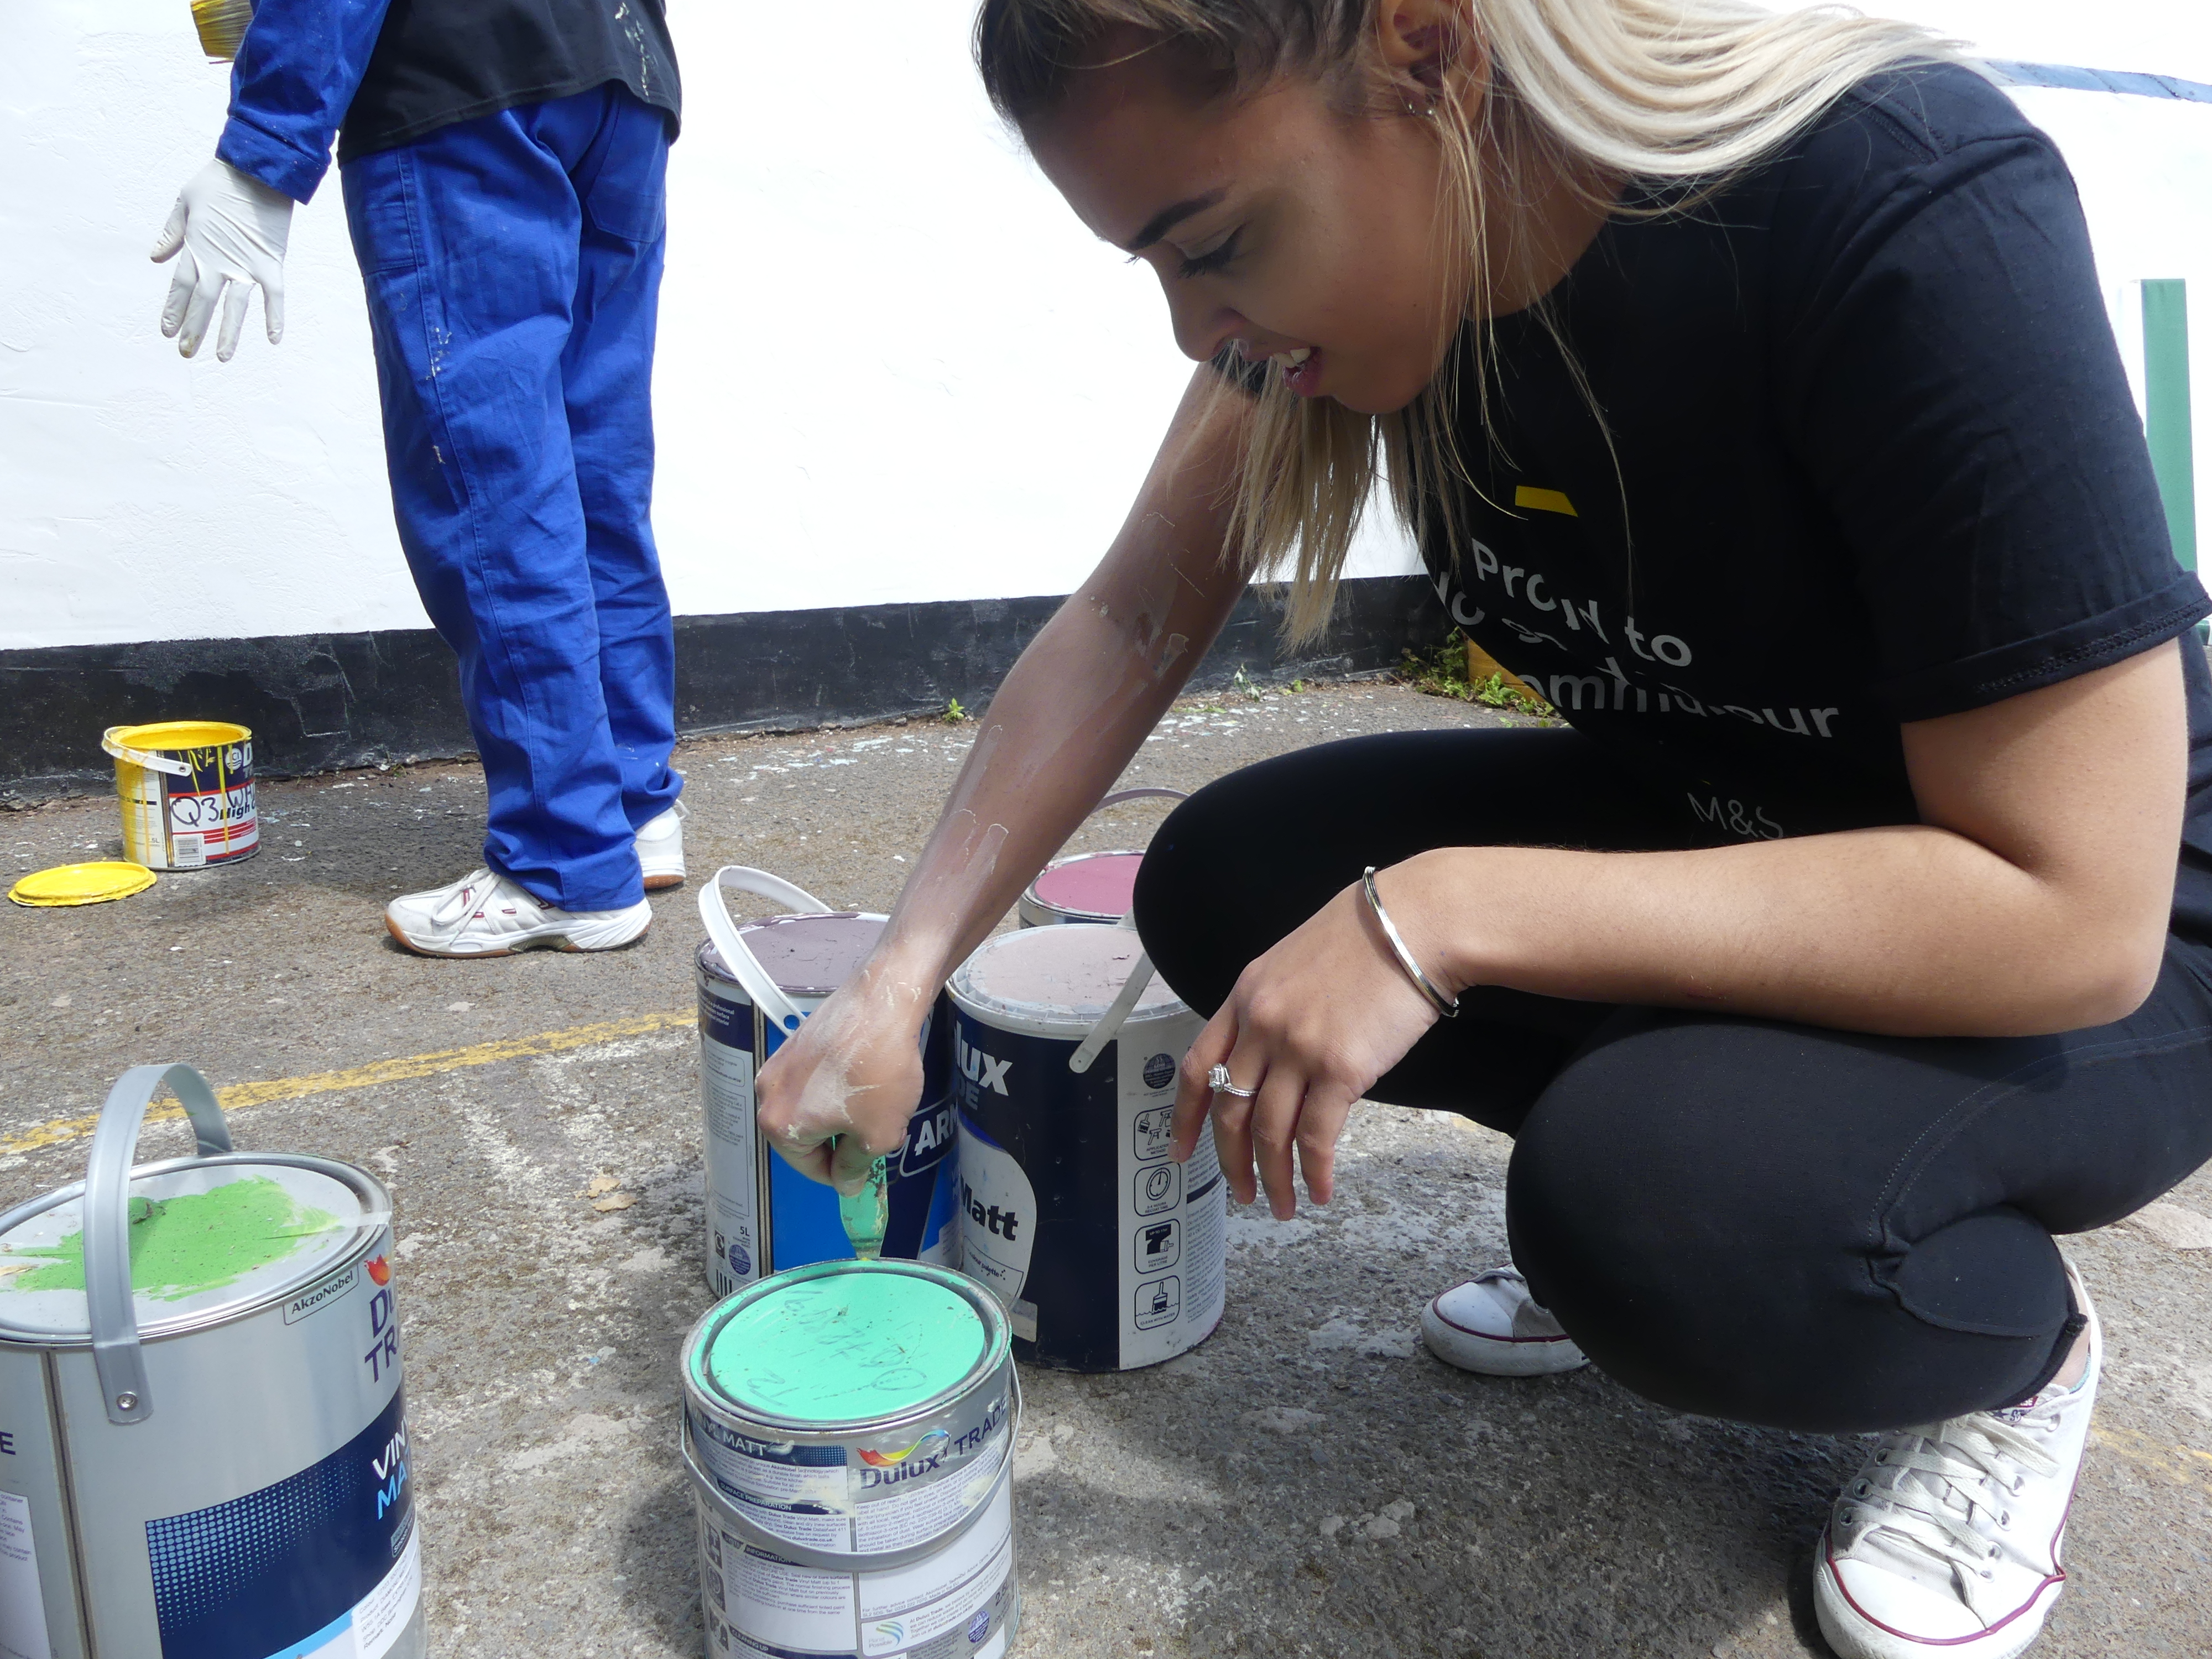 A volunteer opening a green paint container in preparation of painting a community mural using cheap and recycled paint from Community RePaint Birmingham.